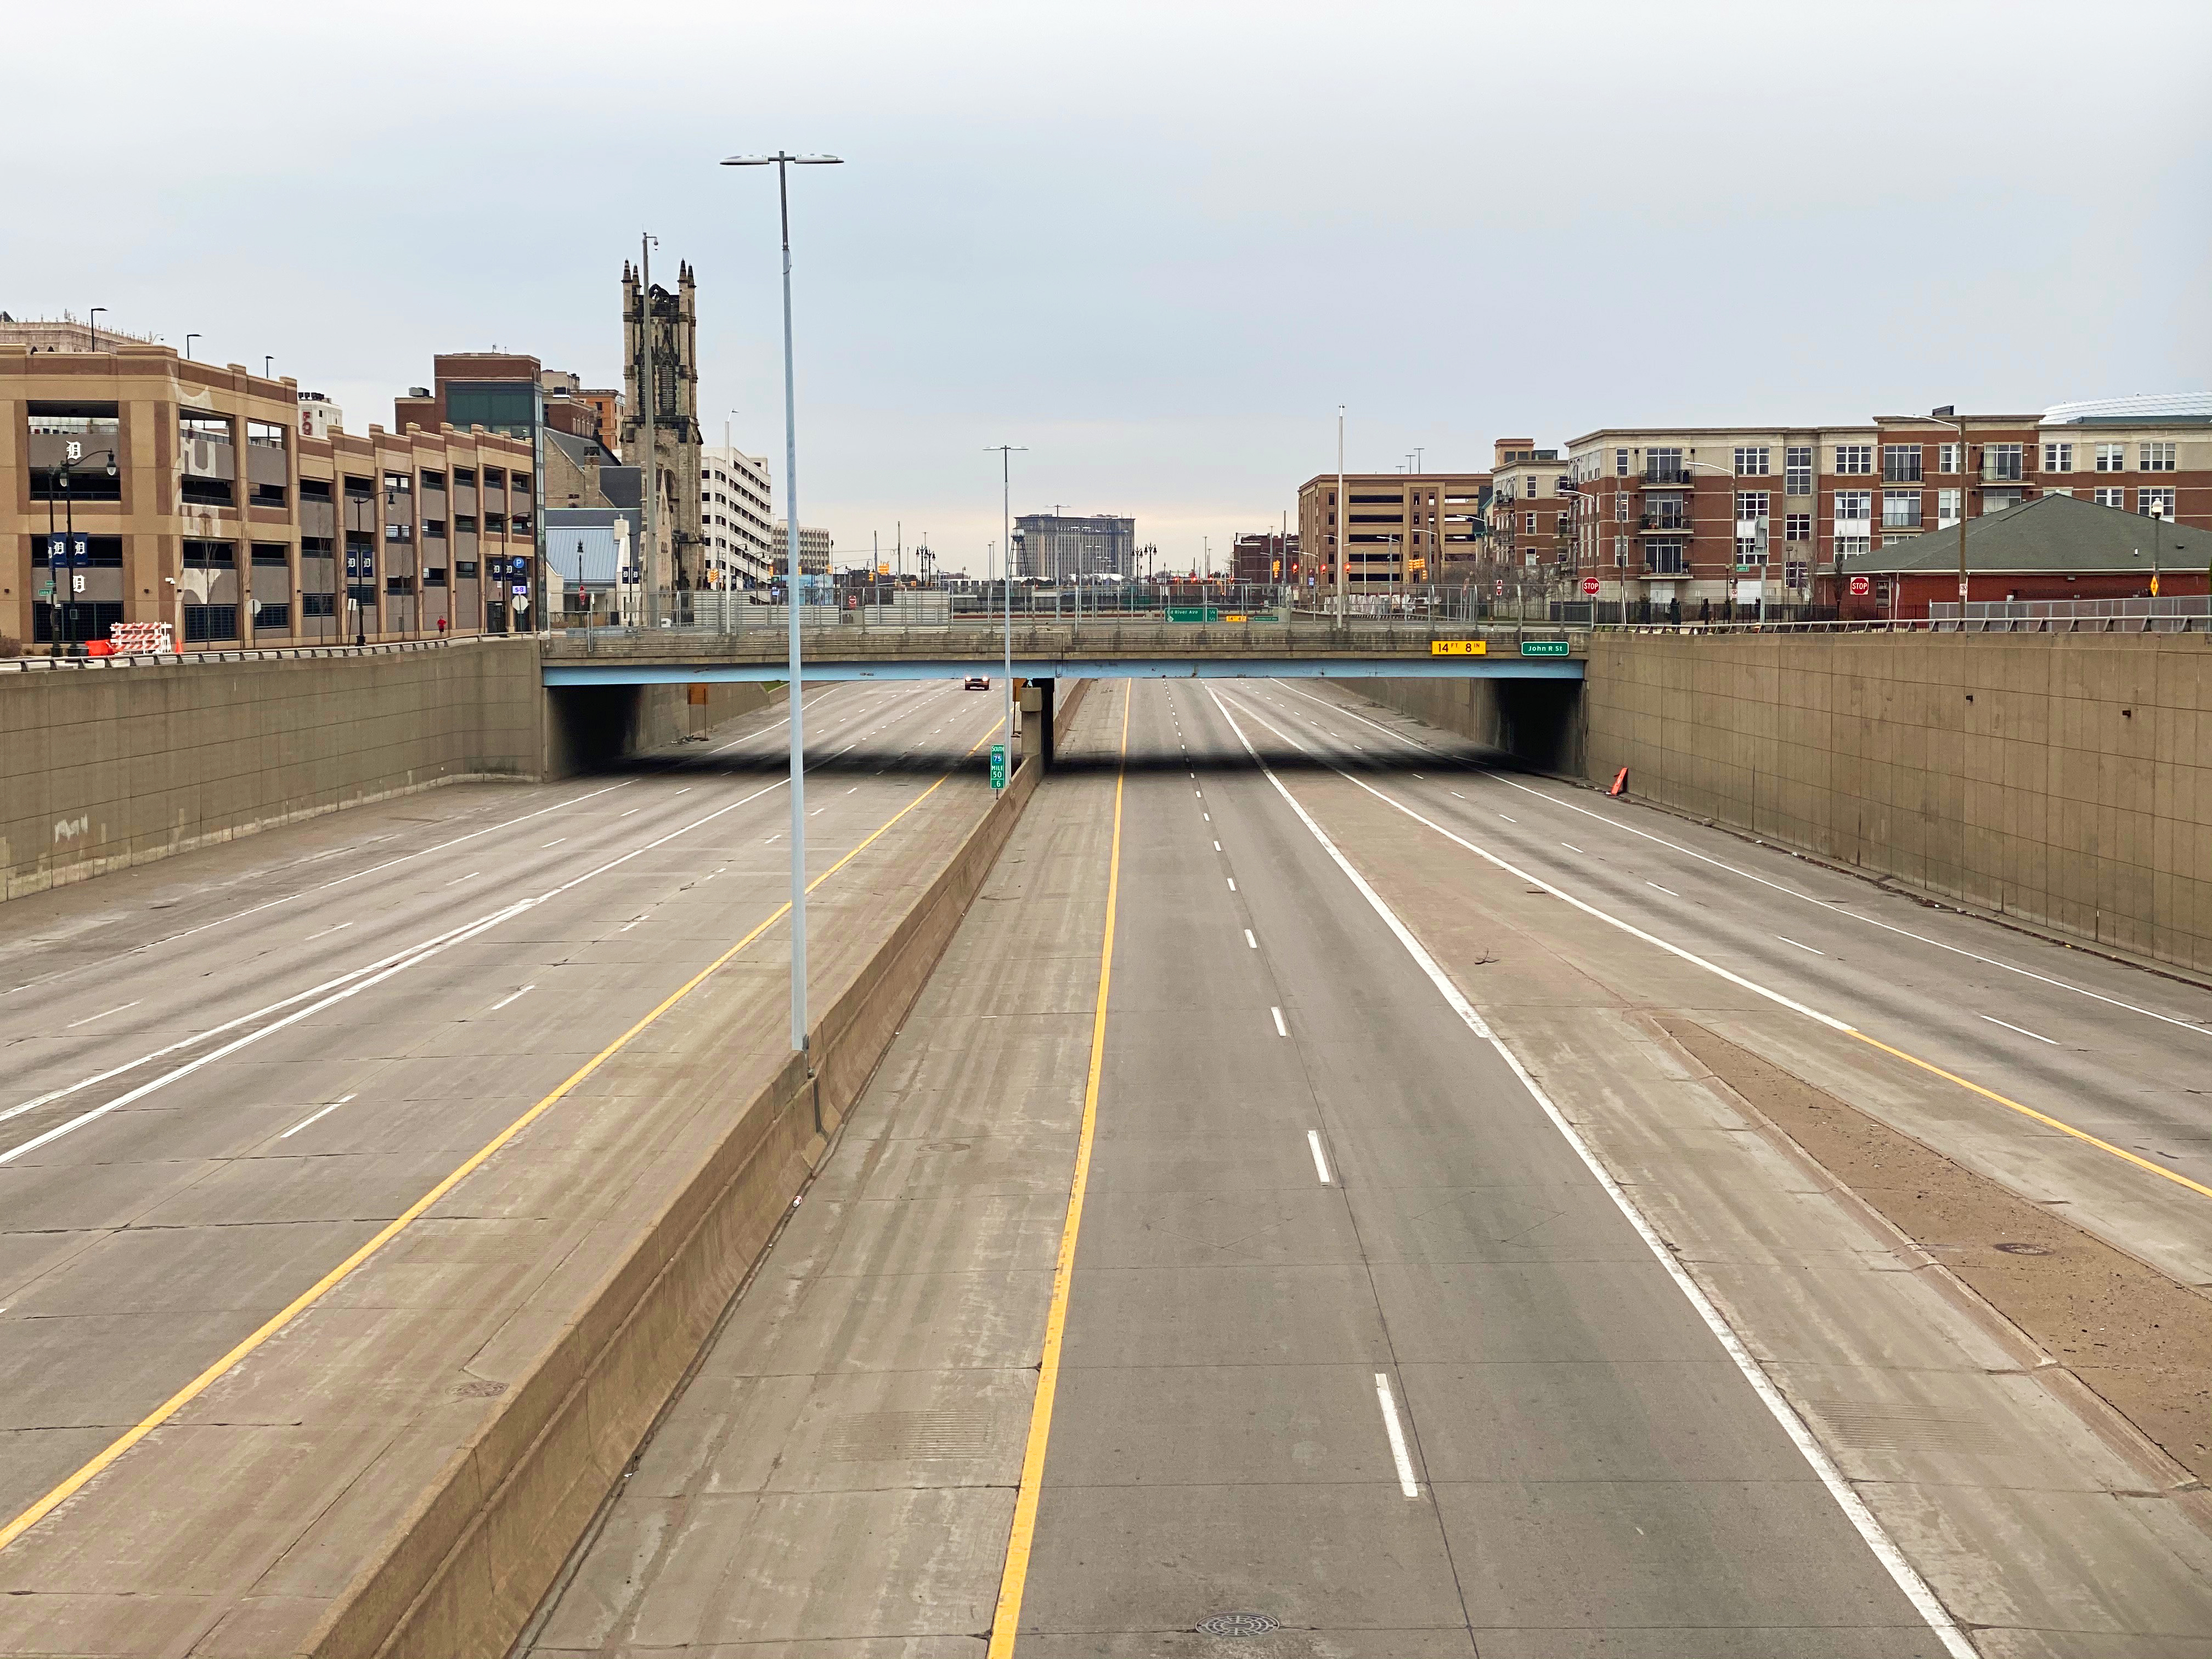 Image of empty road and underpass suggesting a vacant city